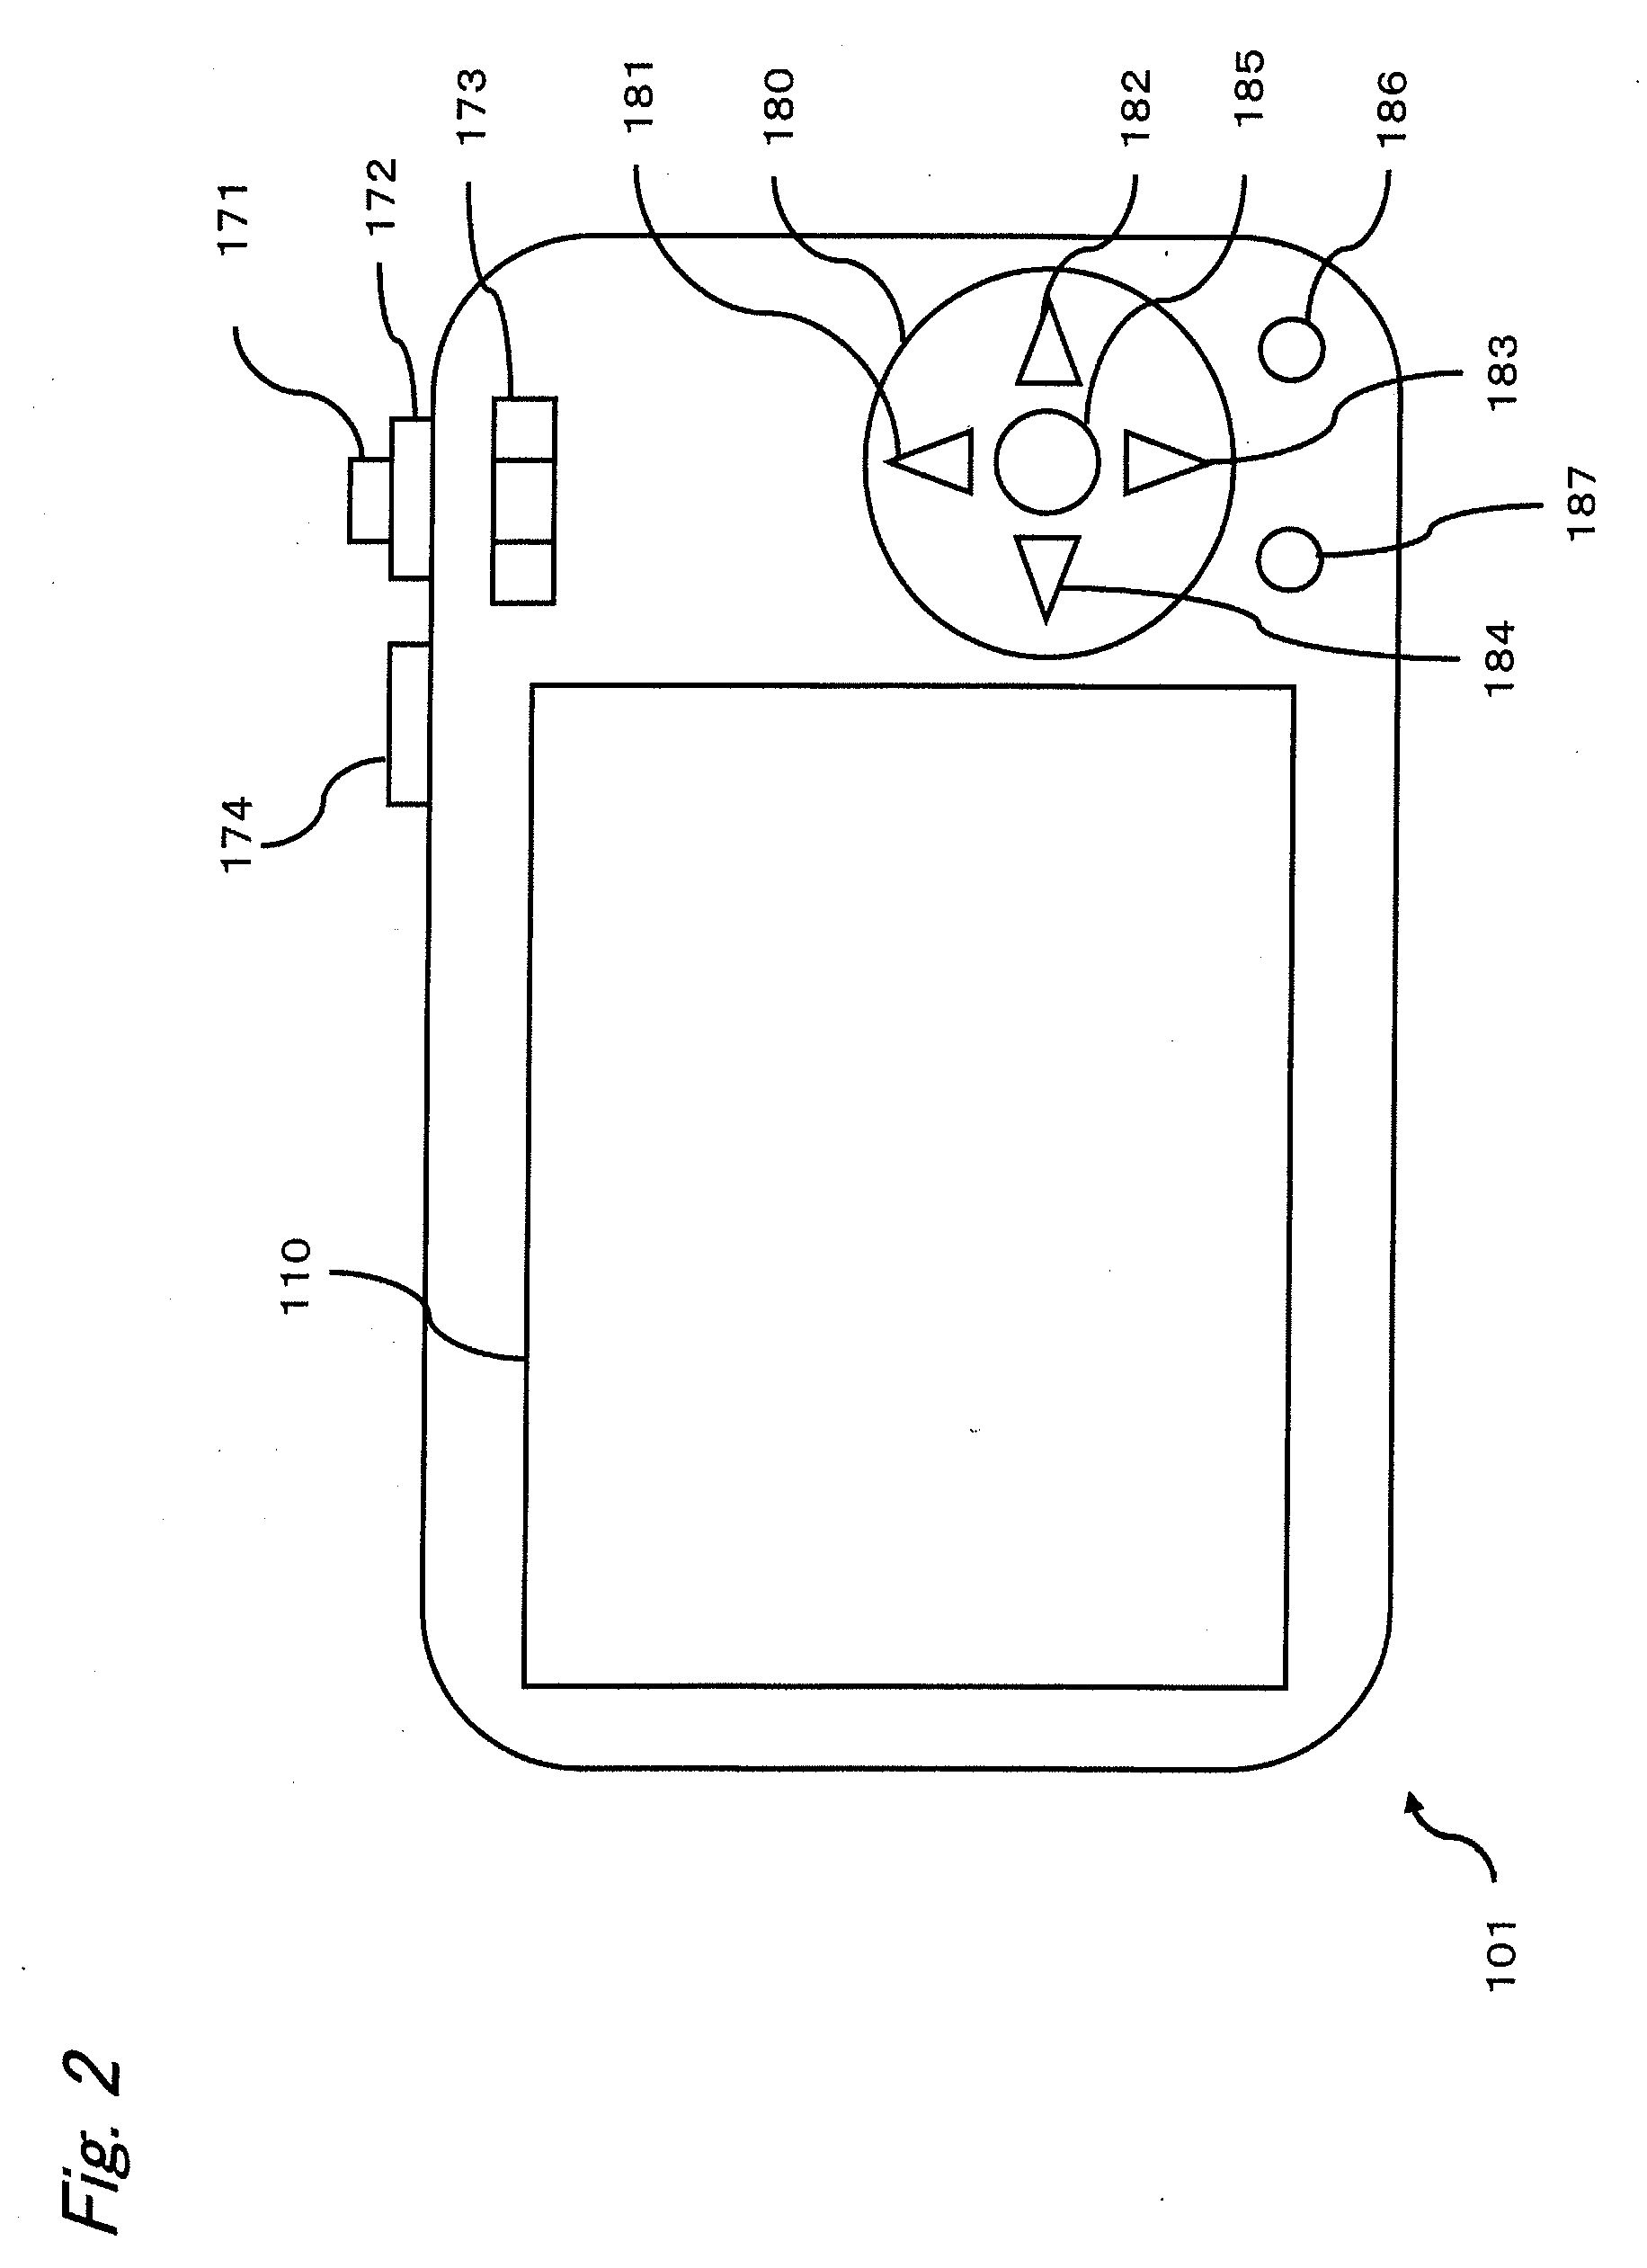 Image file reproduction apparatus and image data reproduction apparatus